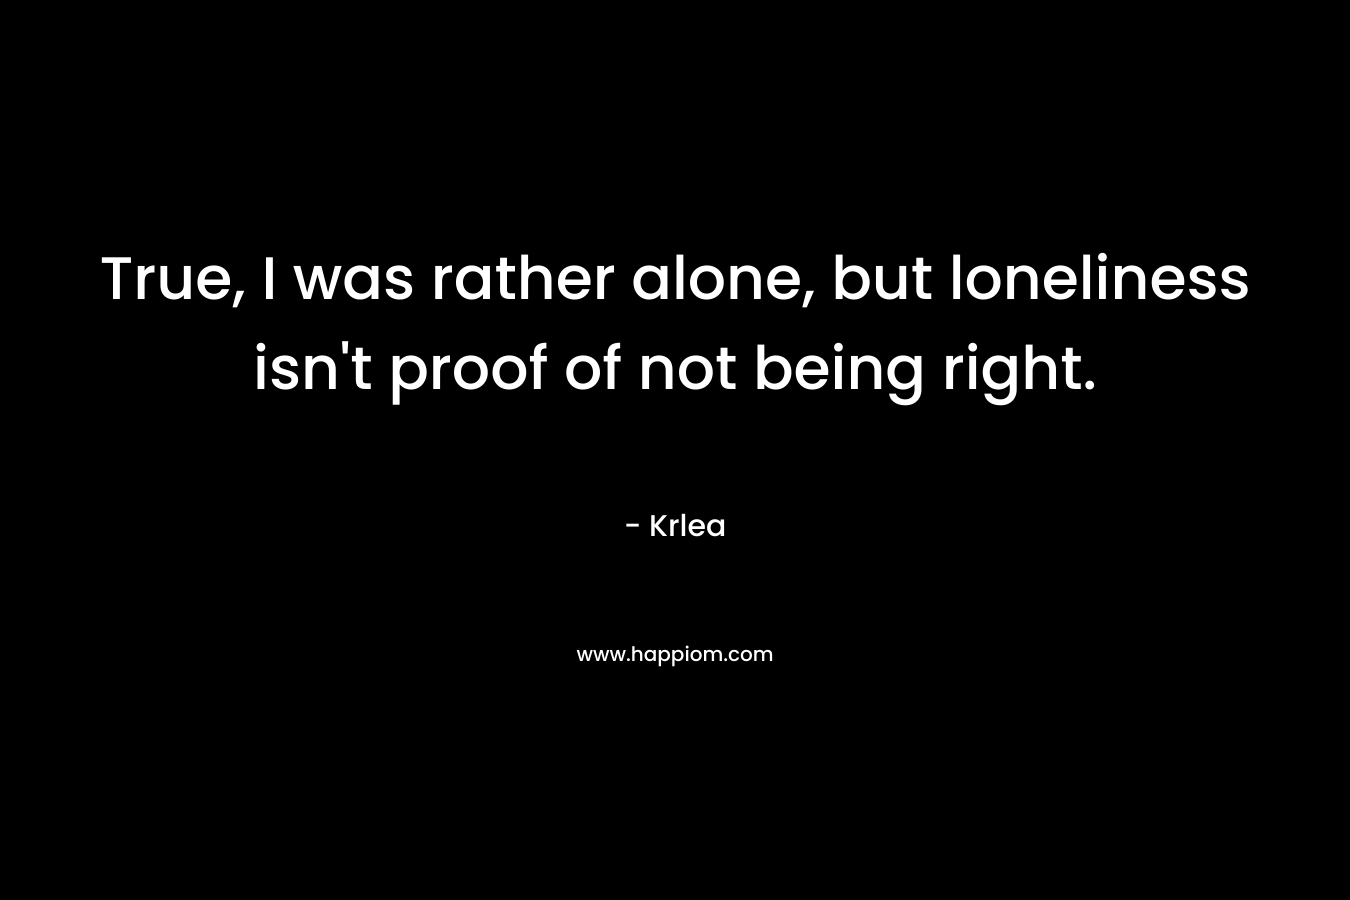 True, I was rather alone, but loneliness isn't proof of not being right.